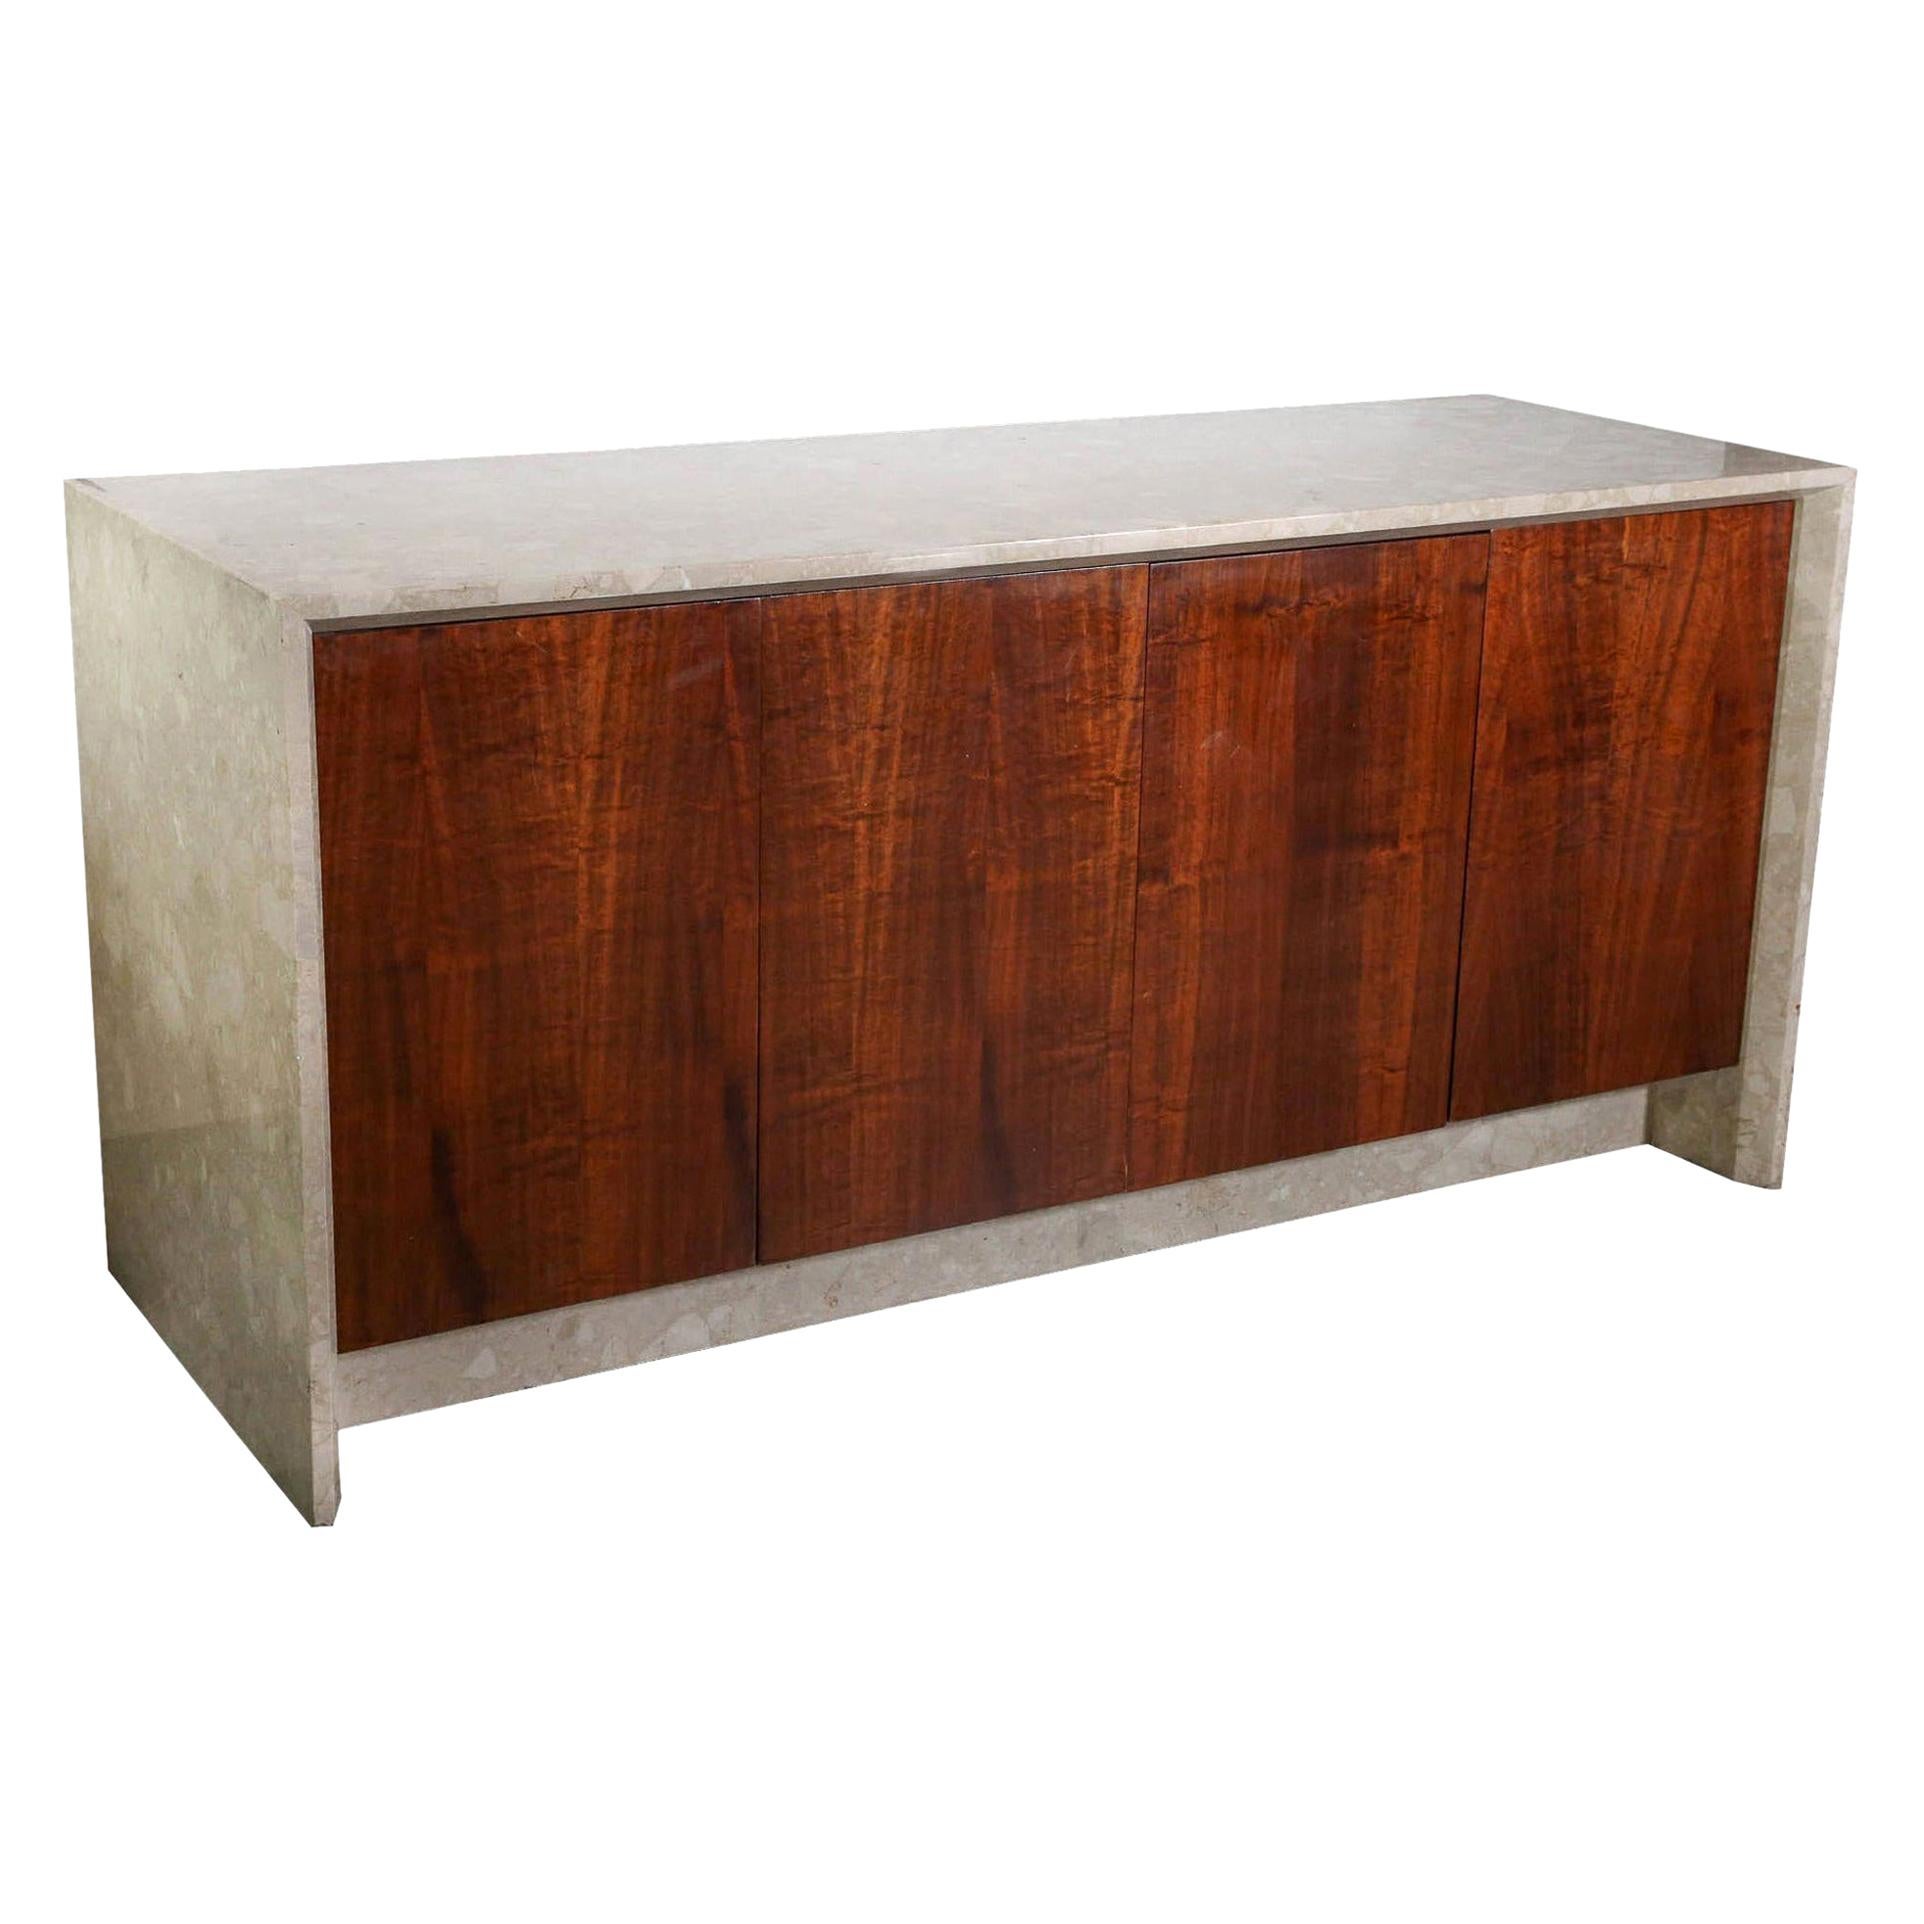 Polished White, Tan and Brown Travertine Marble and Rosewood Two-Sided Sideboard For Sale